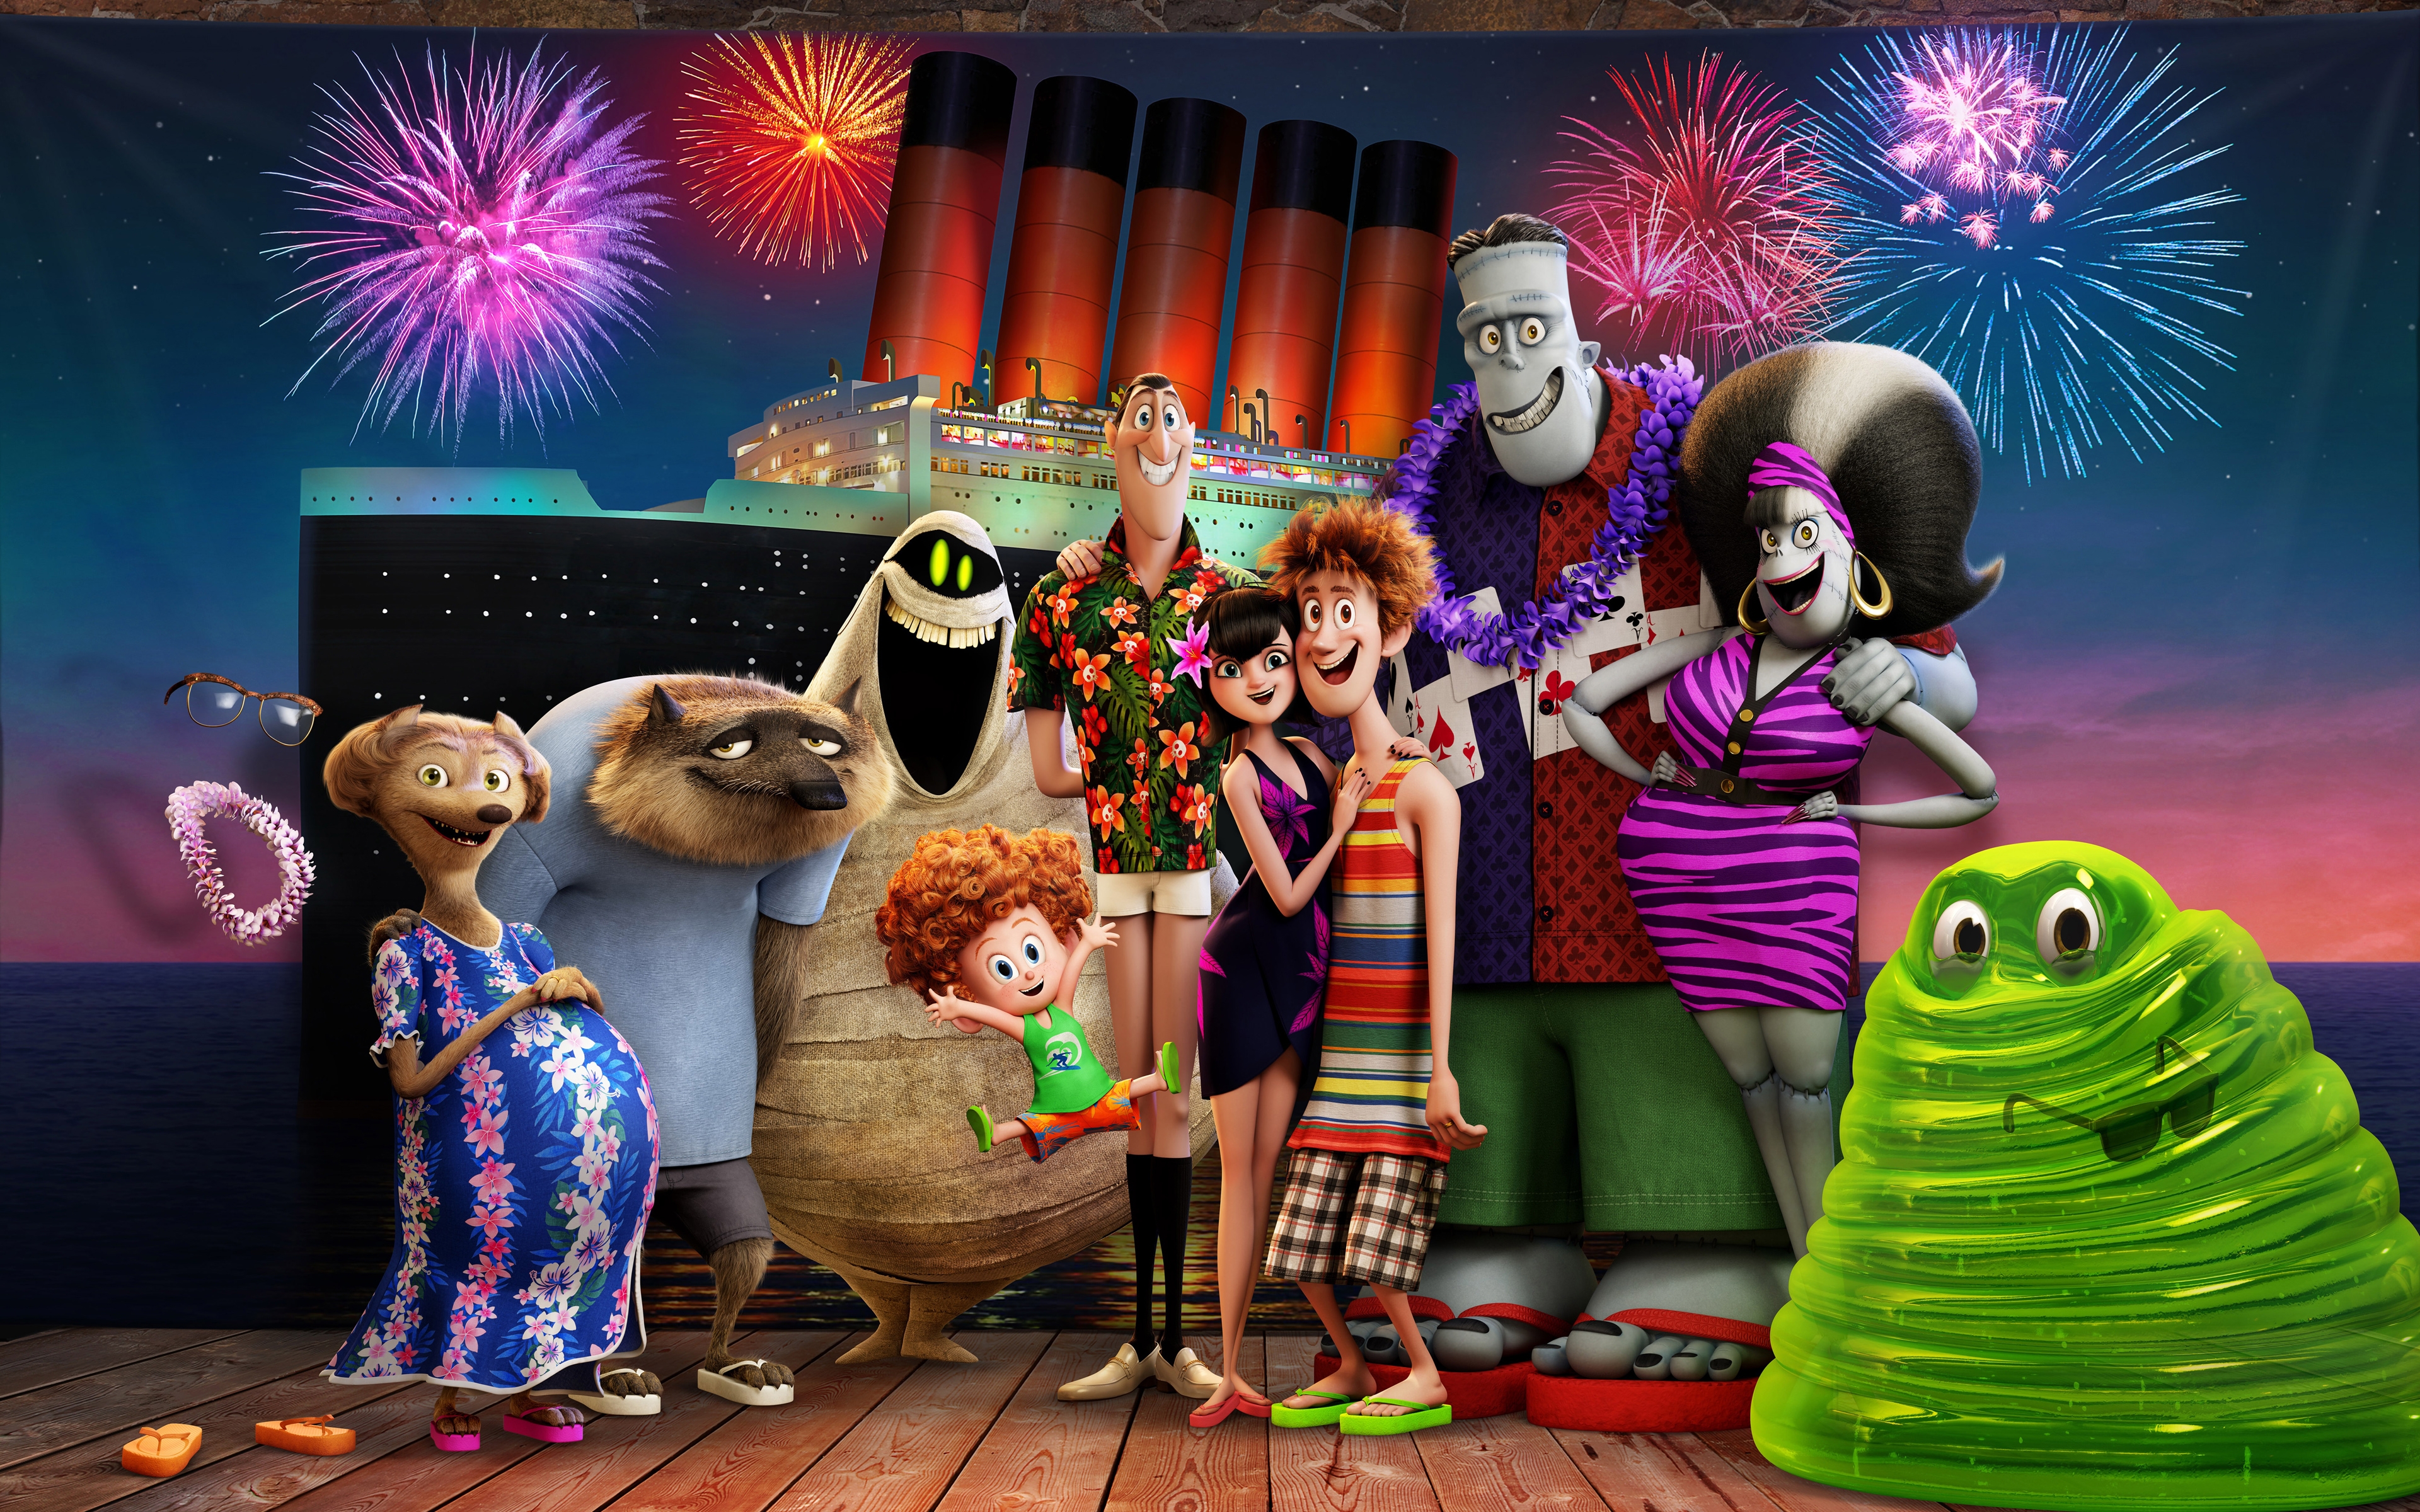 Download a free photo about fireworks wallpaper hotel transylvania 3 animat...